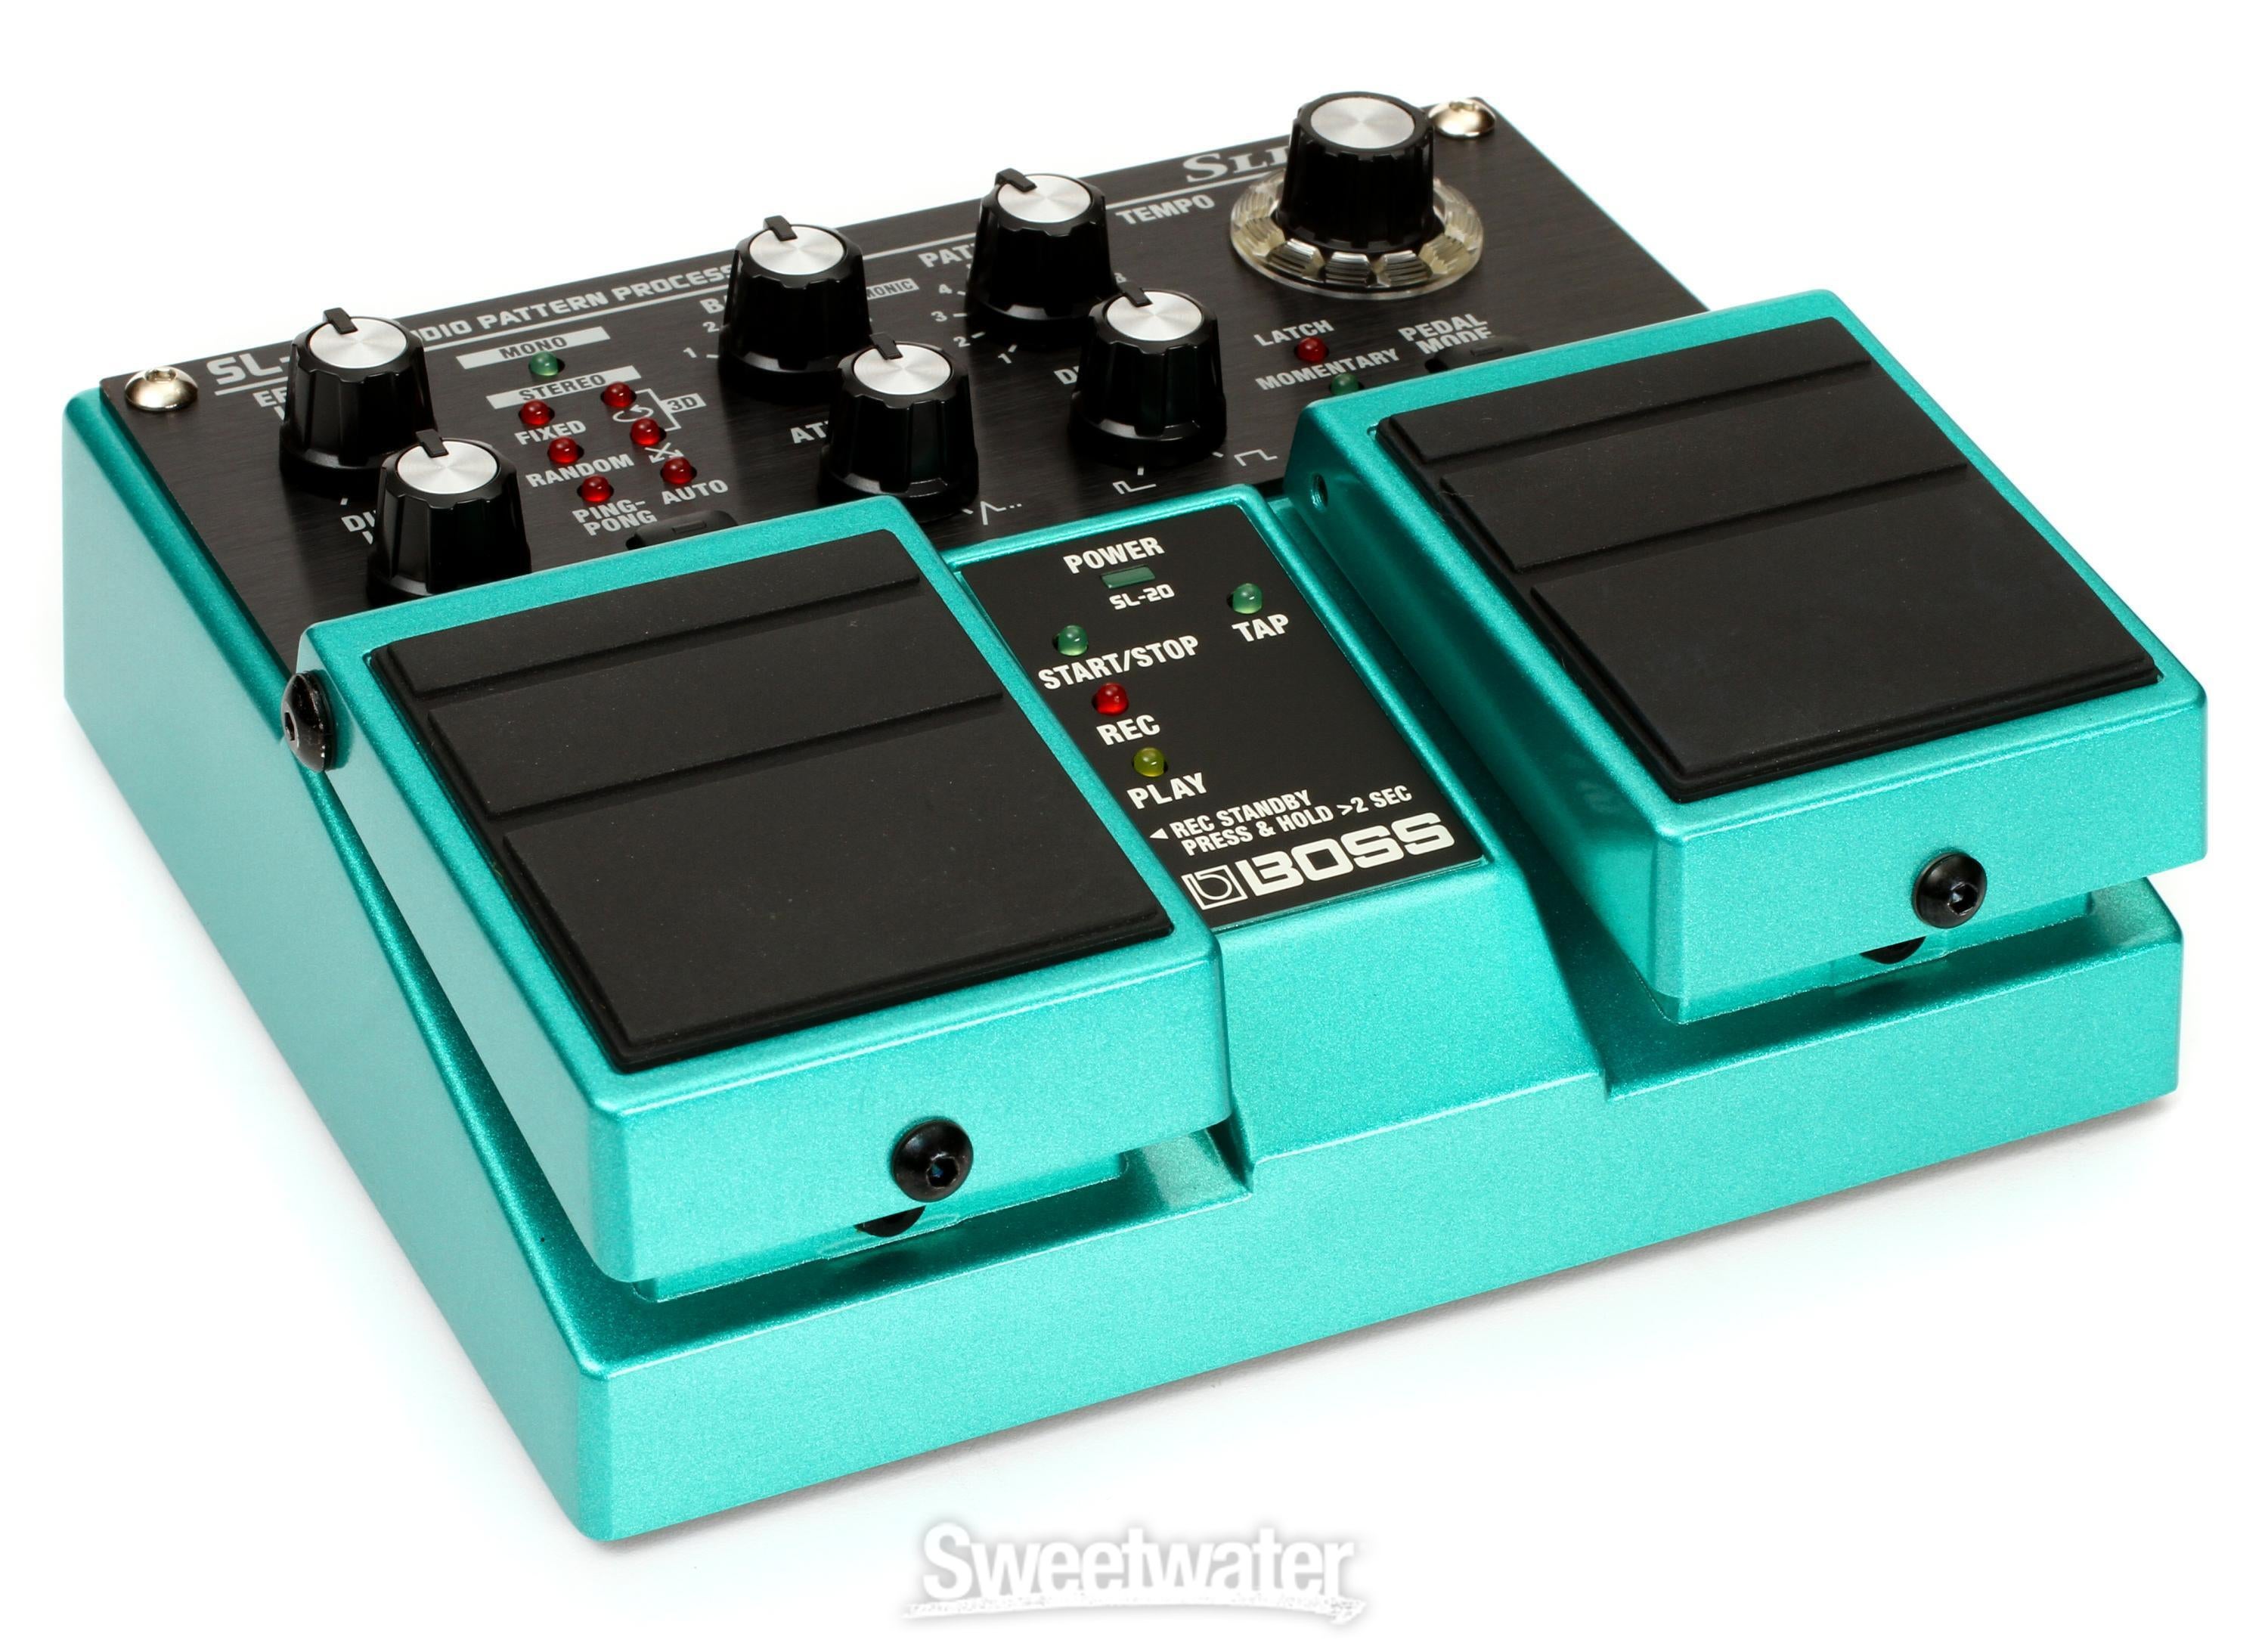 Boss SL-20 Slicer Audio Pattern Processor Pedal Reviews | Sweetwater